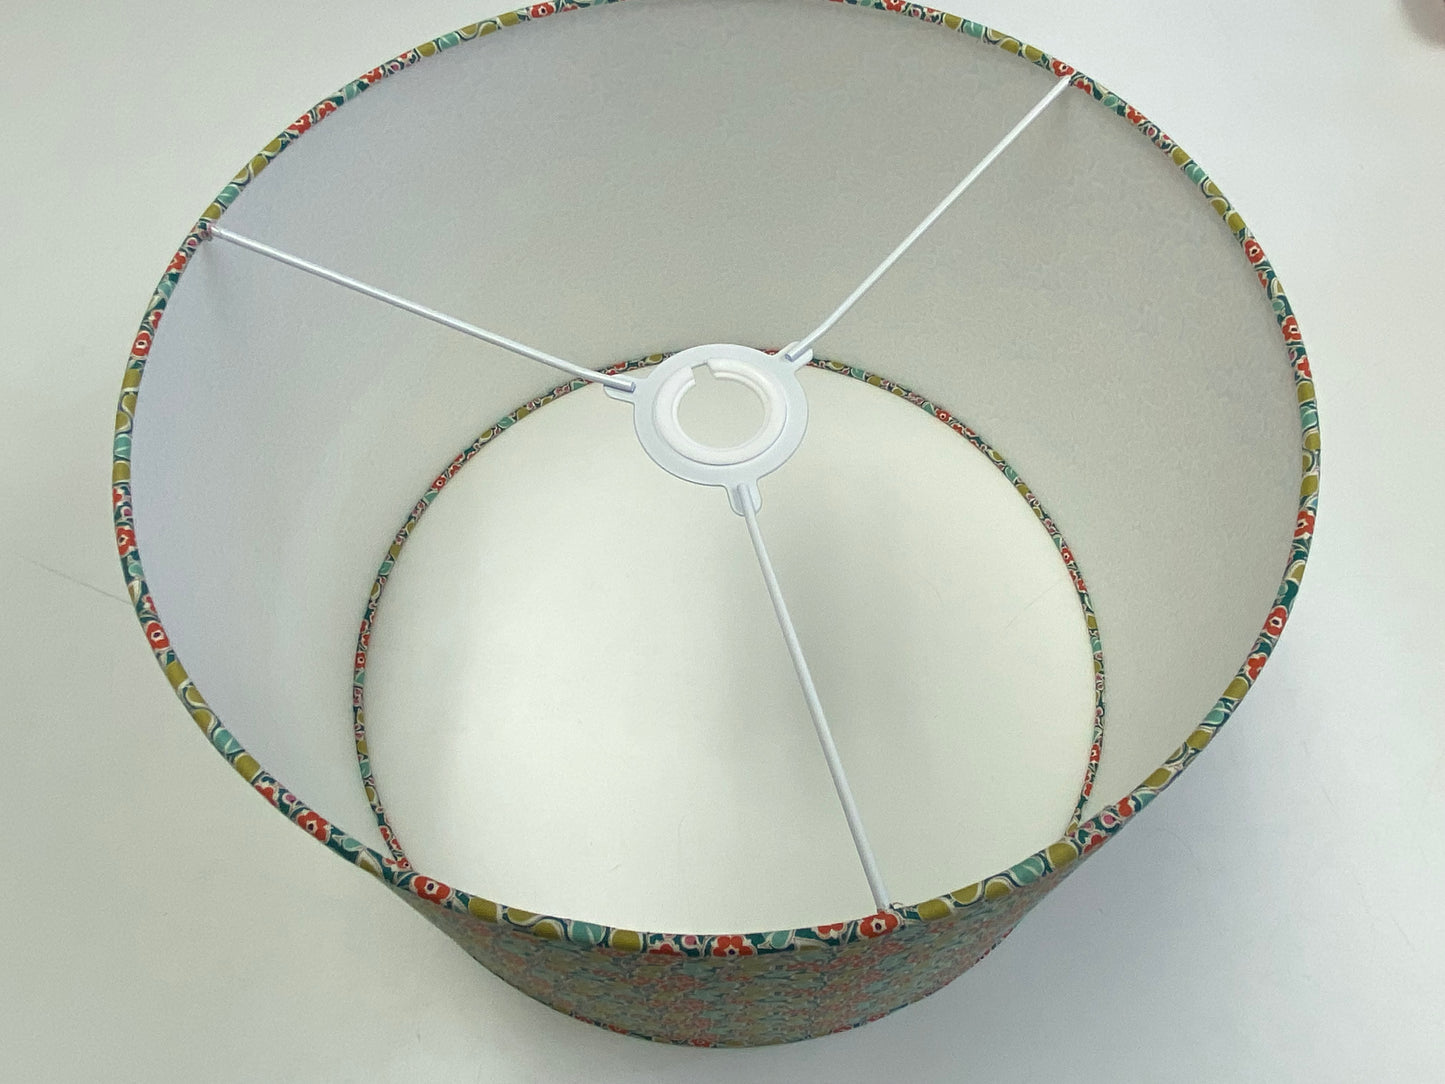 Rounded Rectangle Lampshade Kit - 20cm x 10cm for Pendant or Table Lamp use